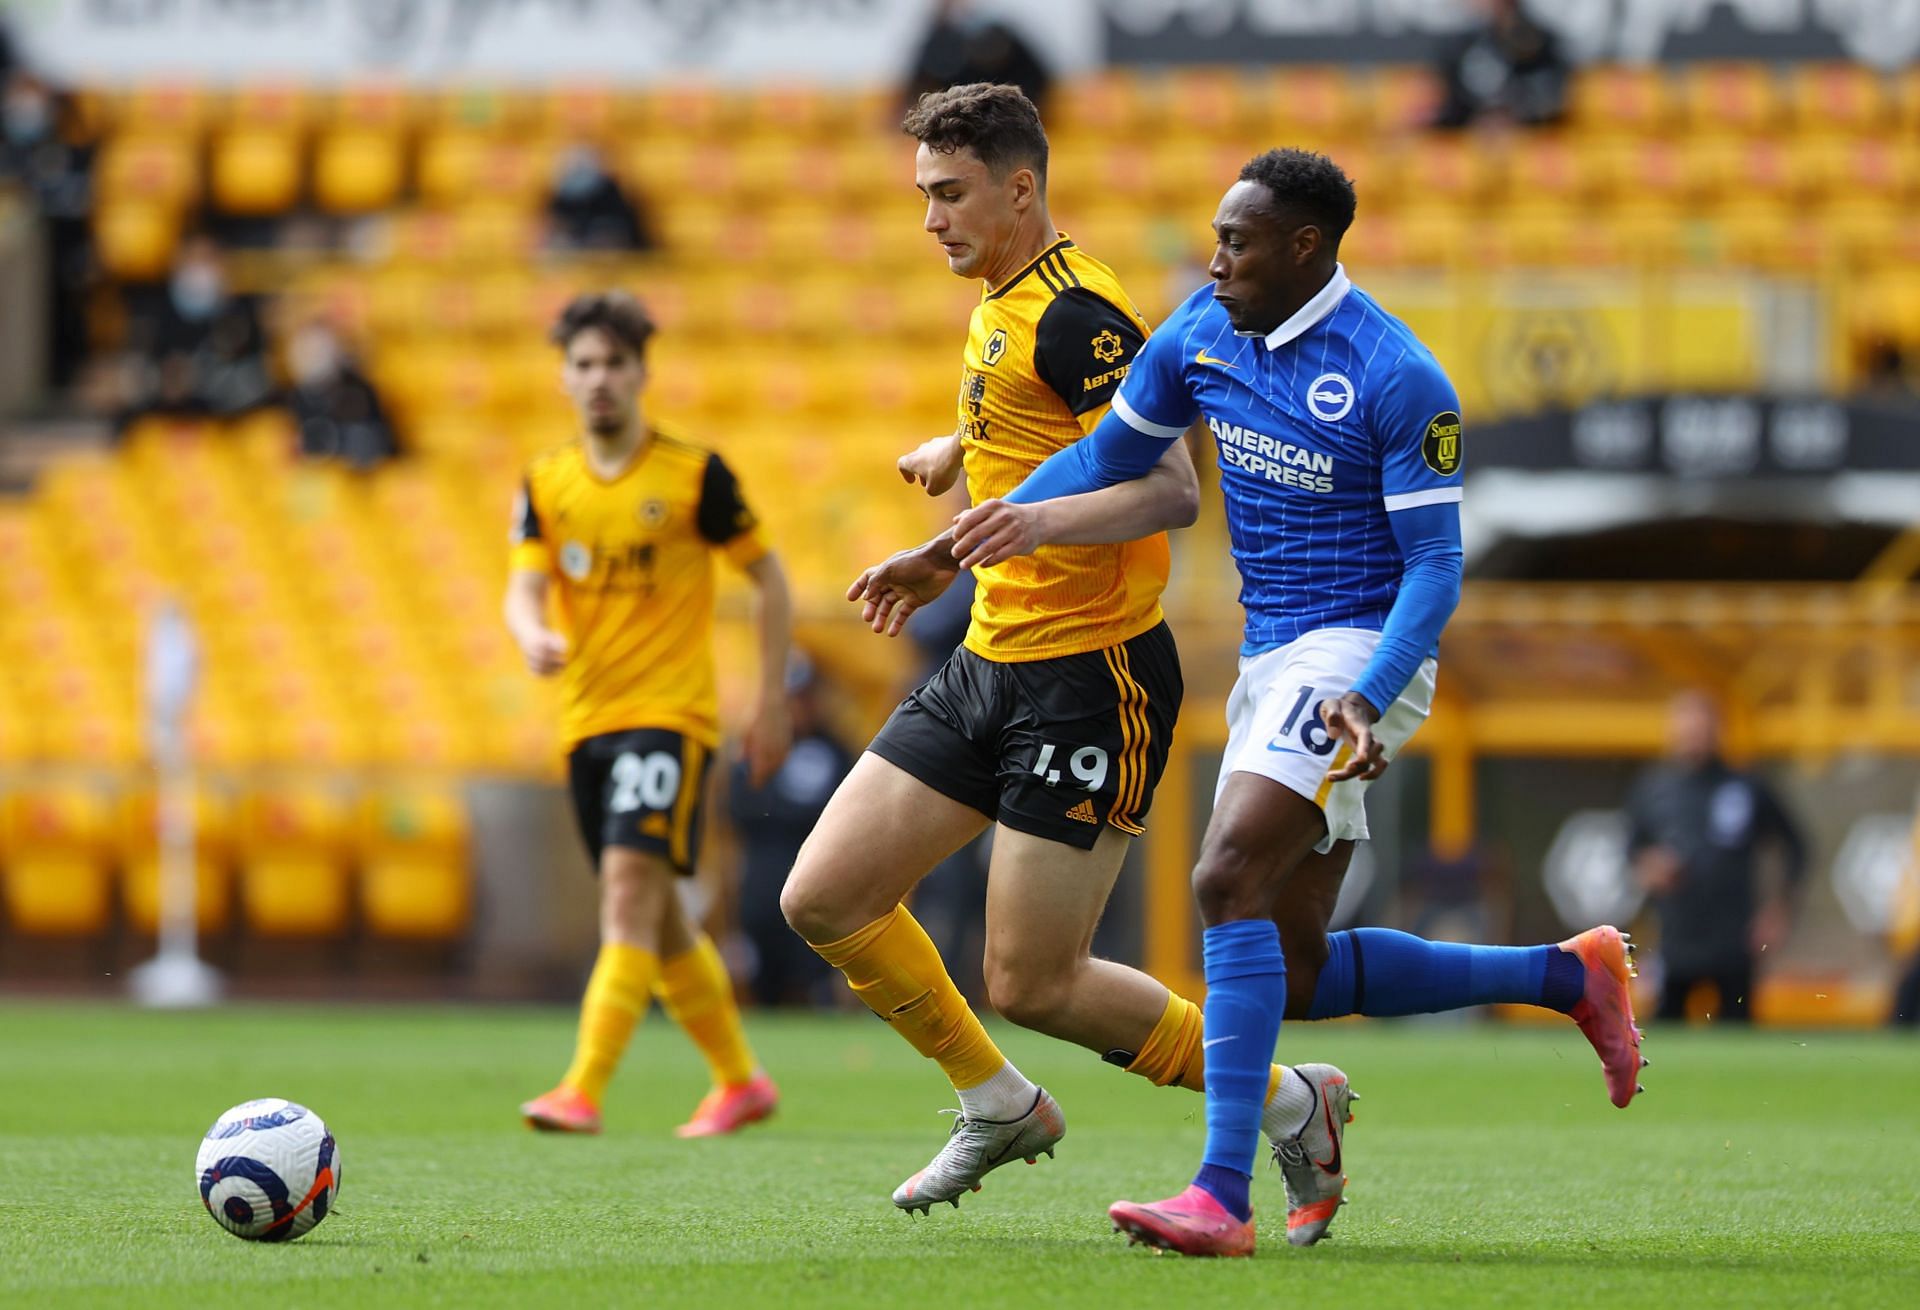 Brighton &amp; Hove Albion host Wolverhampton Wanderers in their Premier League fixture on Wednesday